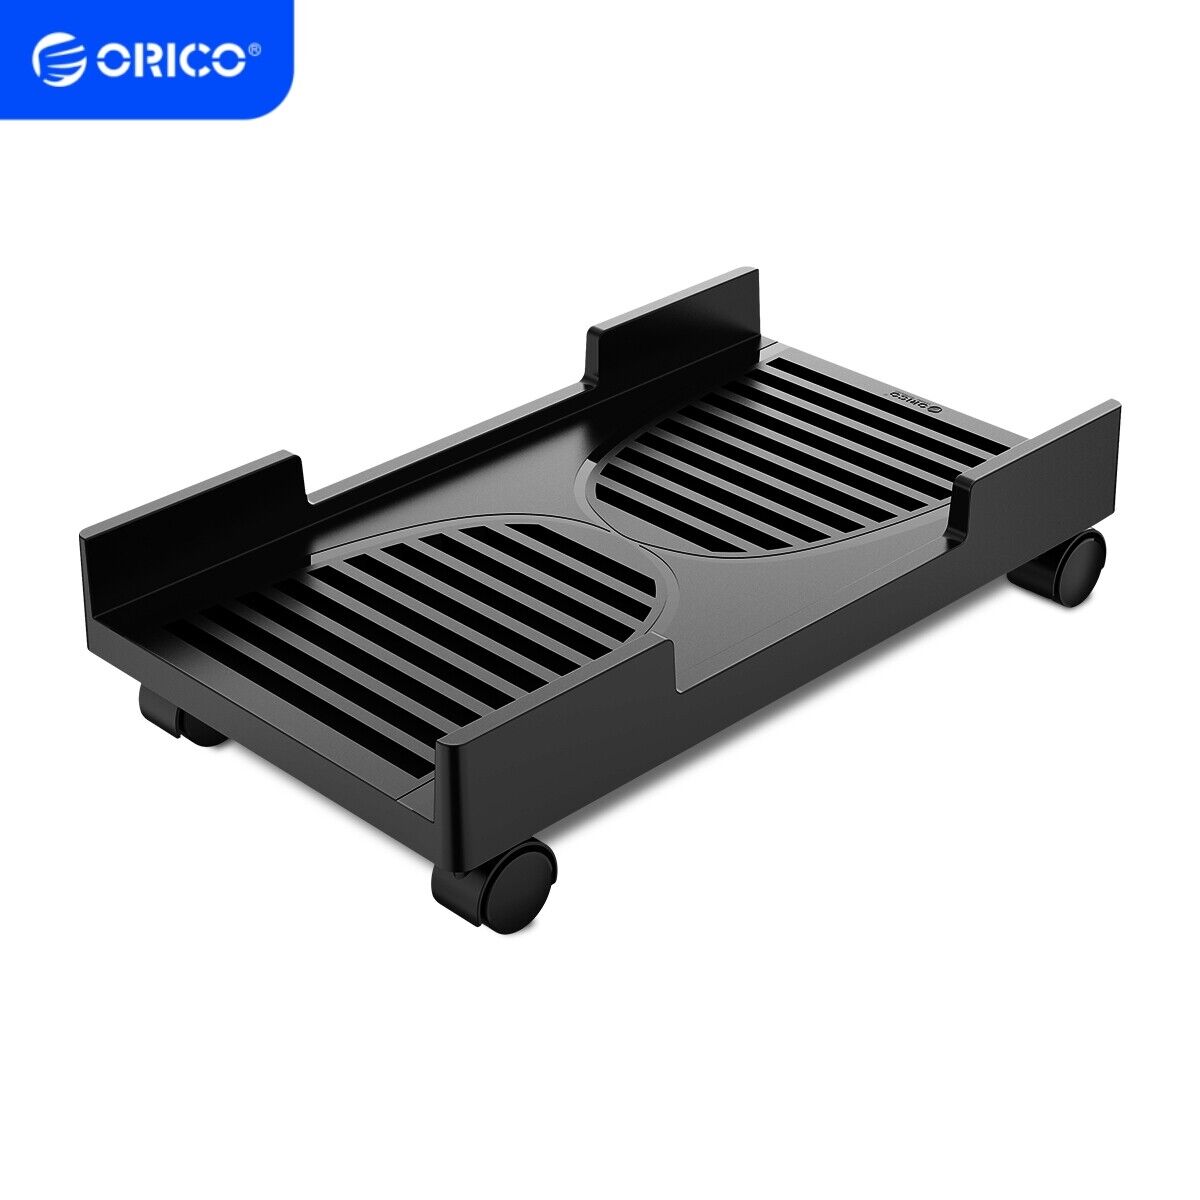 ORICO Computer Tower Stand, Mobile CPU Holder with 4 Caster Wheels Fits PC Tower